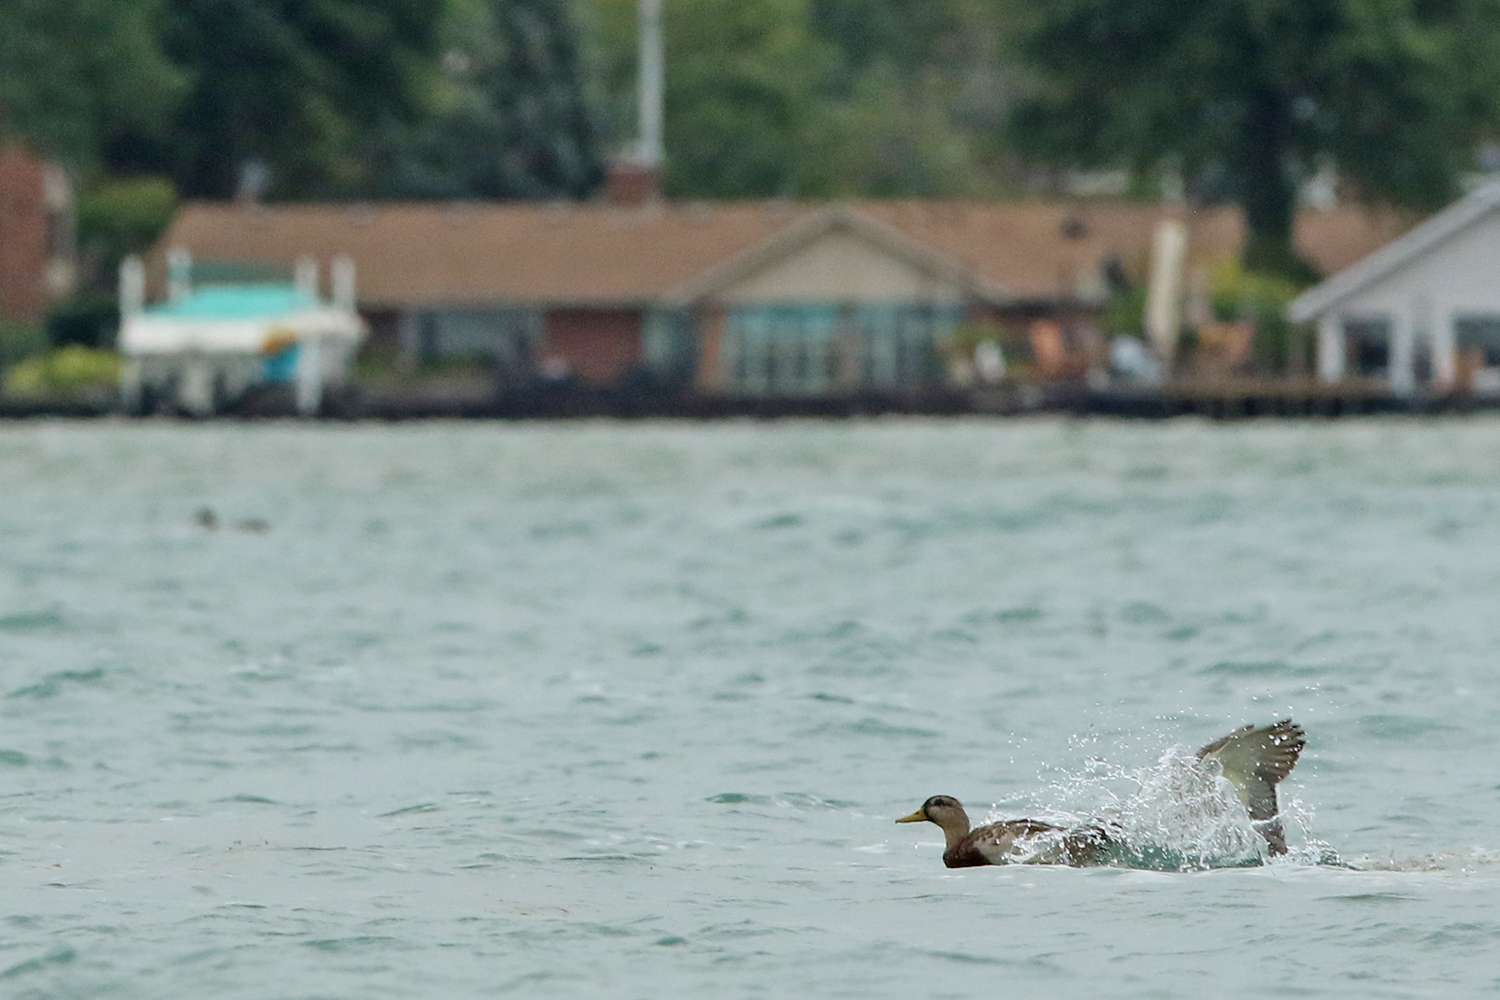 Ducks doing ducky things at St. Clair Bassmaster Elite AOY Championship, 2019.